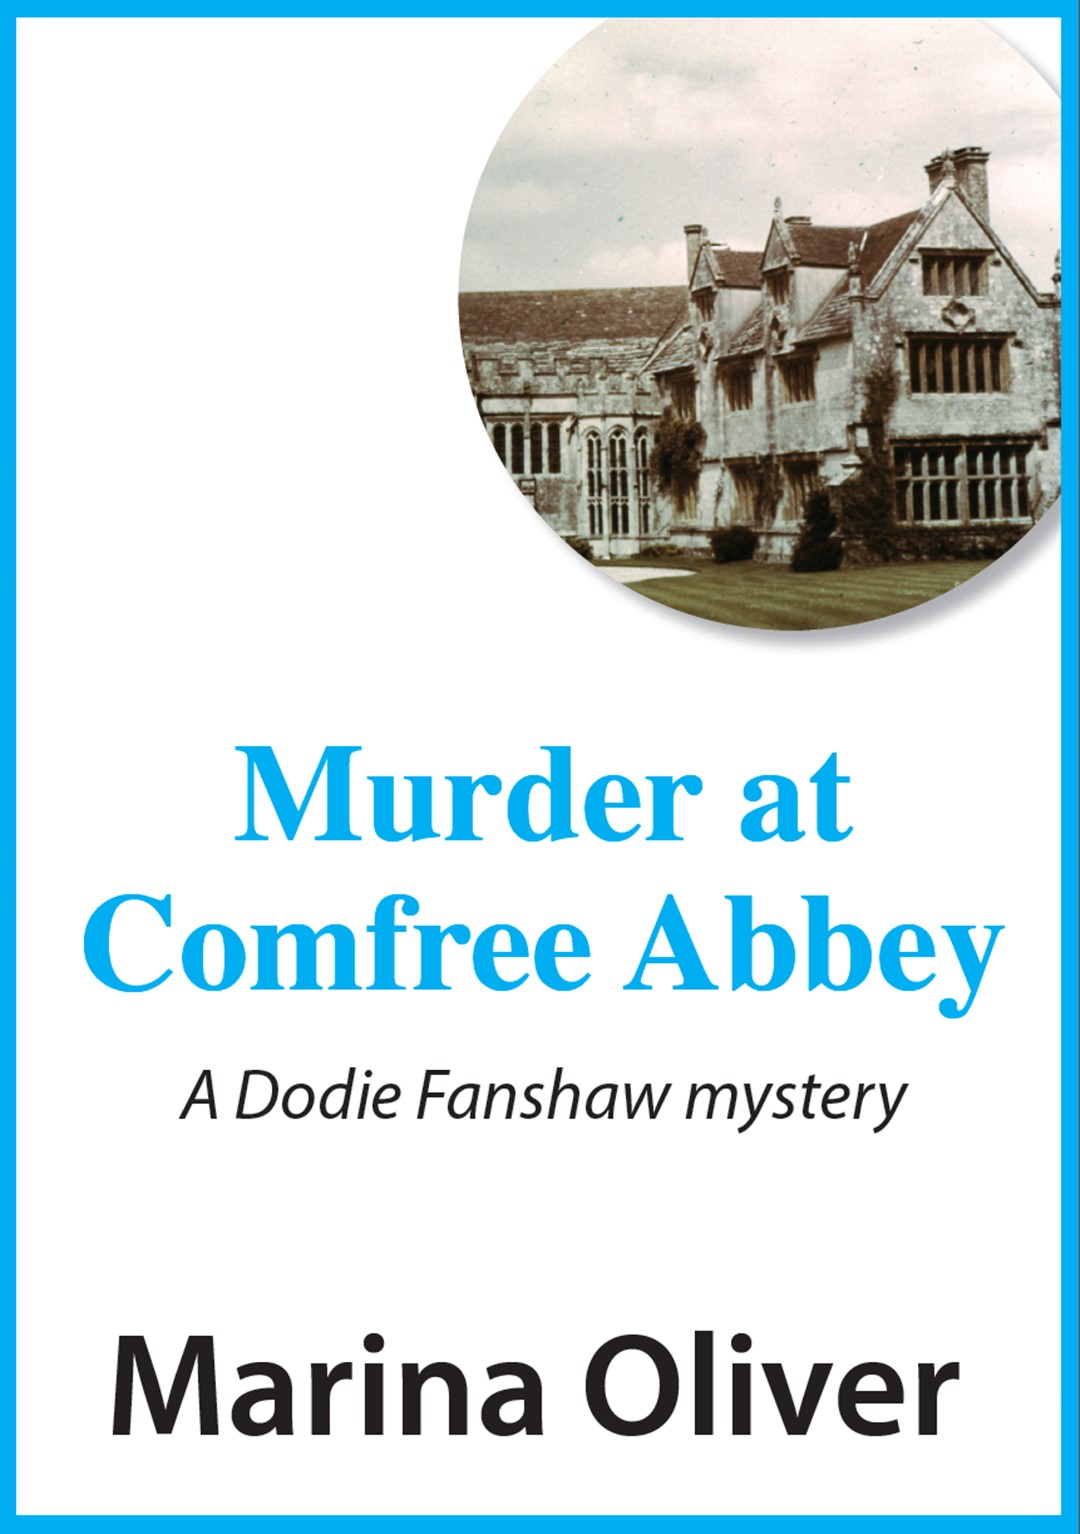 Cover of Murder at Comfree Abbey ebook